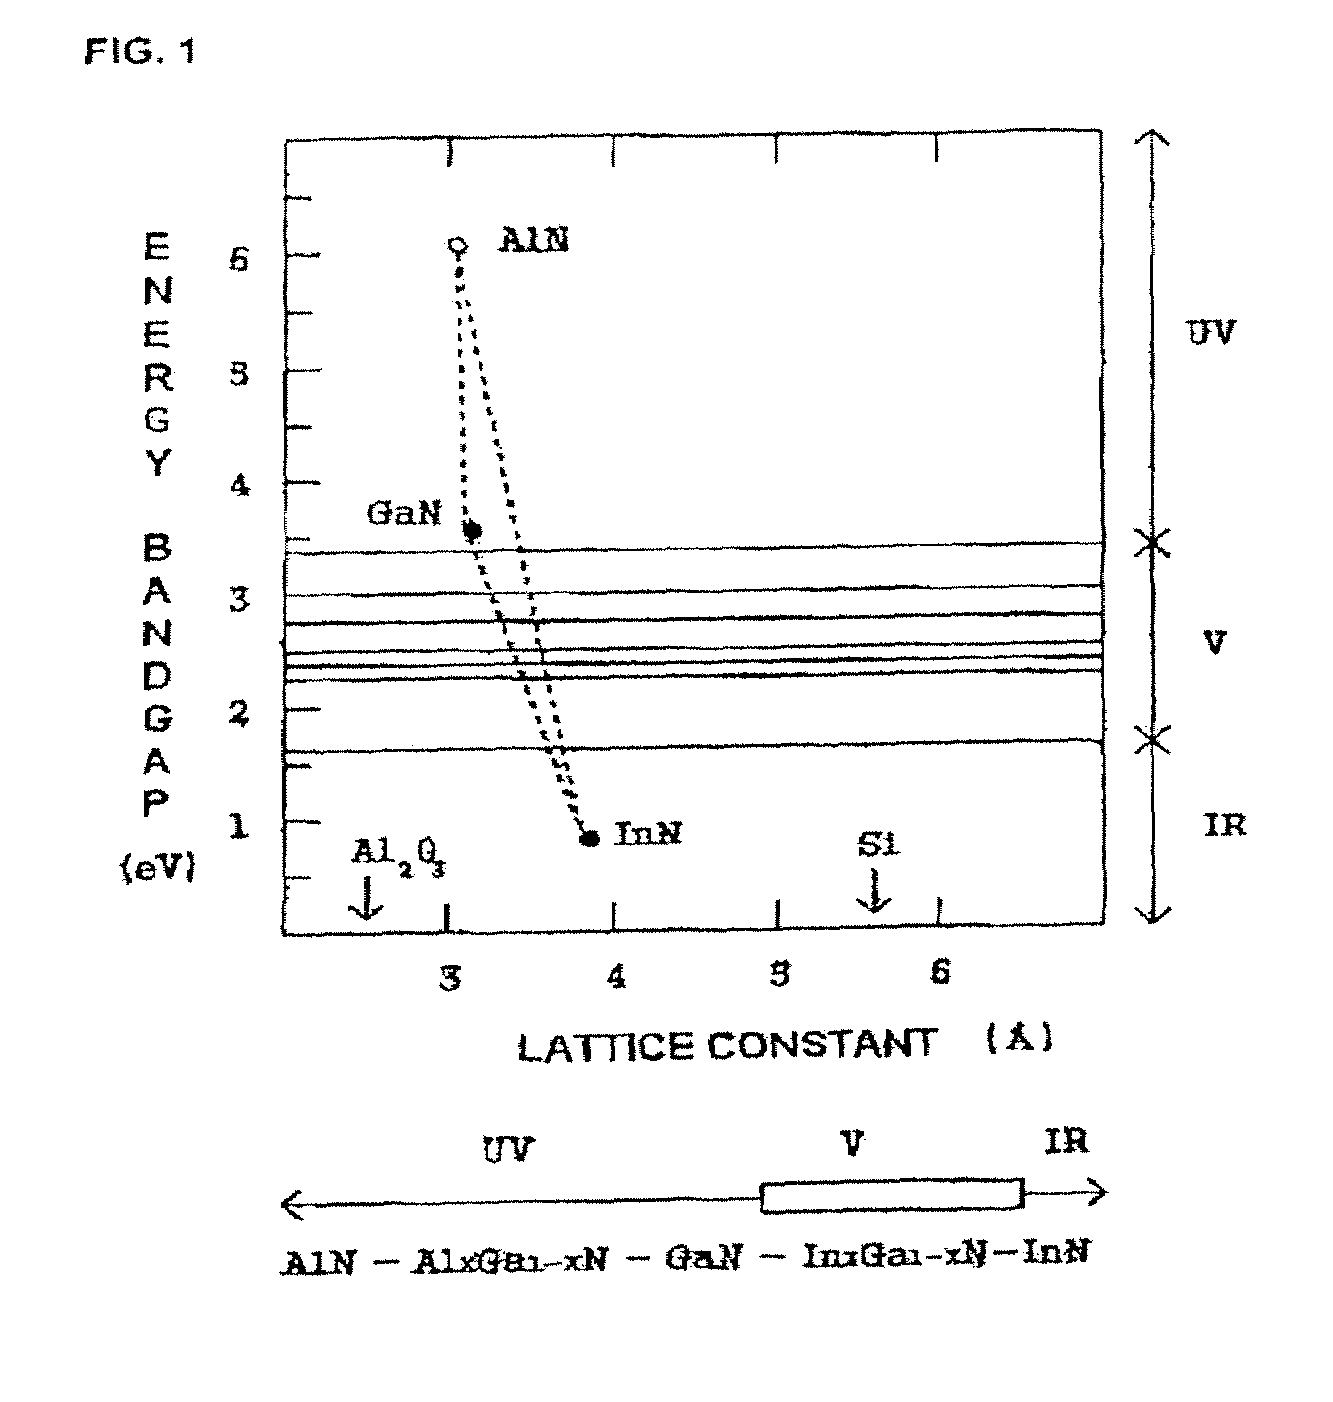 Method of Manufacturing Compound Semiconductor Devices